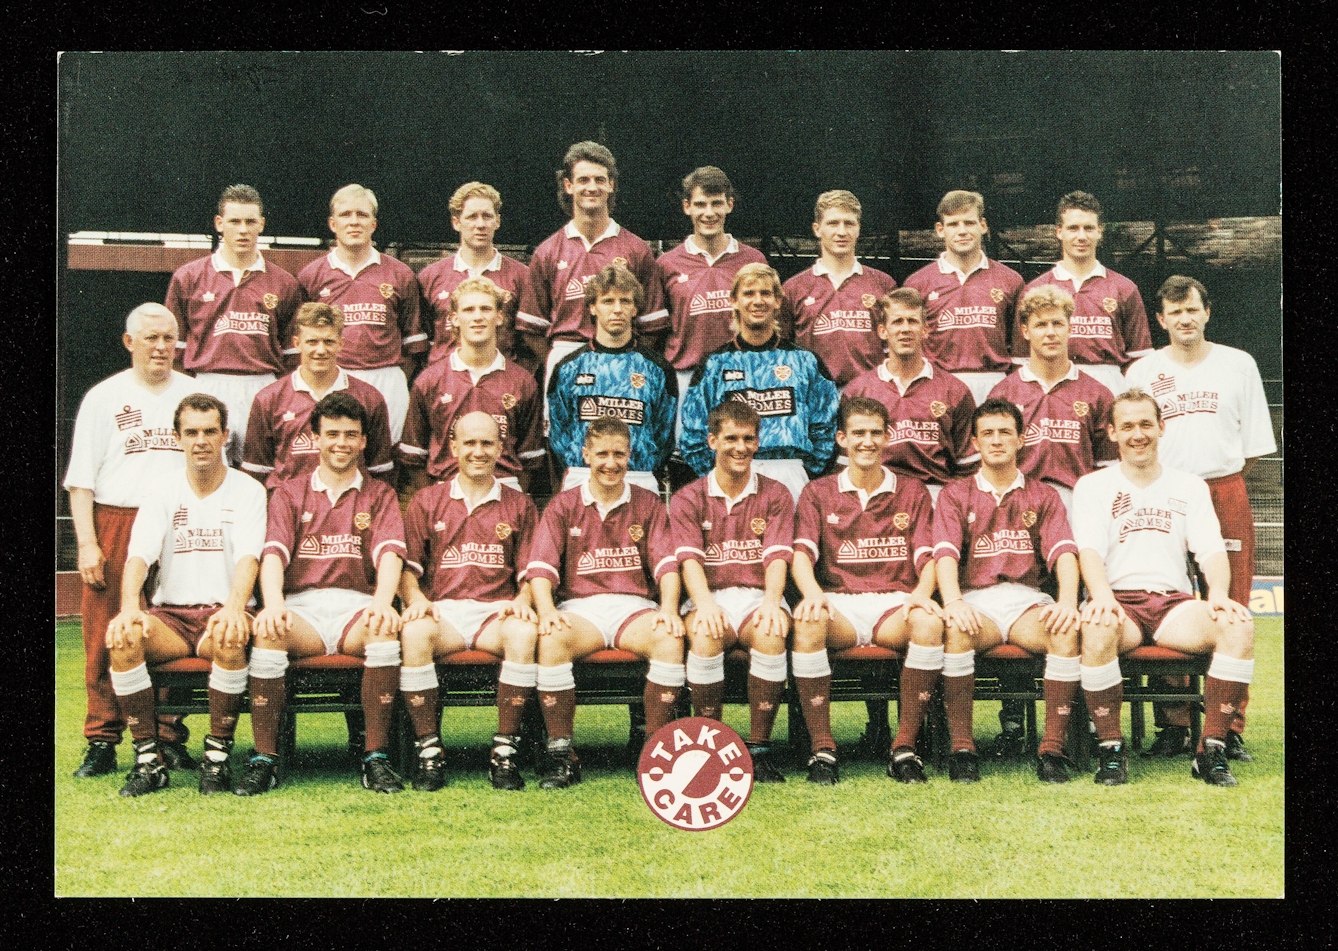 Colour photograph of a 1990s Lothian Football team with a circular graphic logo at the bottom centre of the image that says "Take Care" in the team colours of maroon and white. 